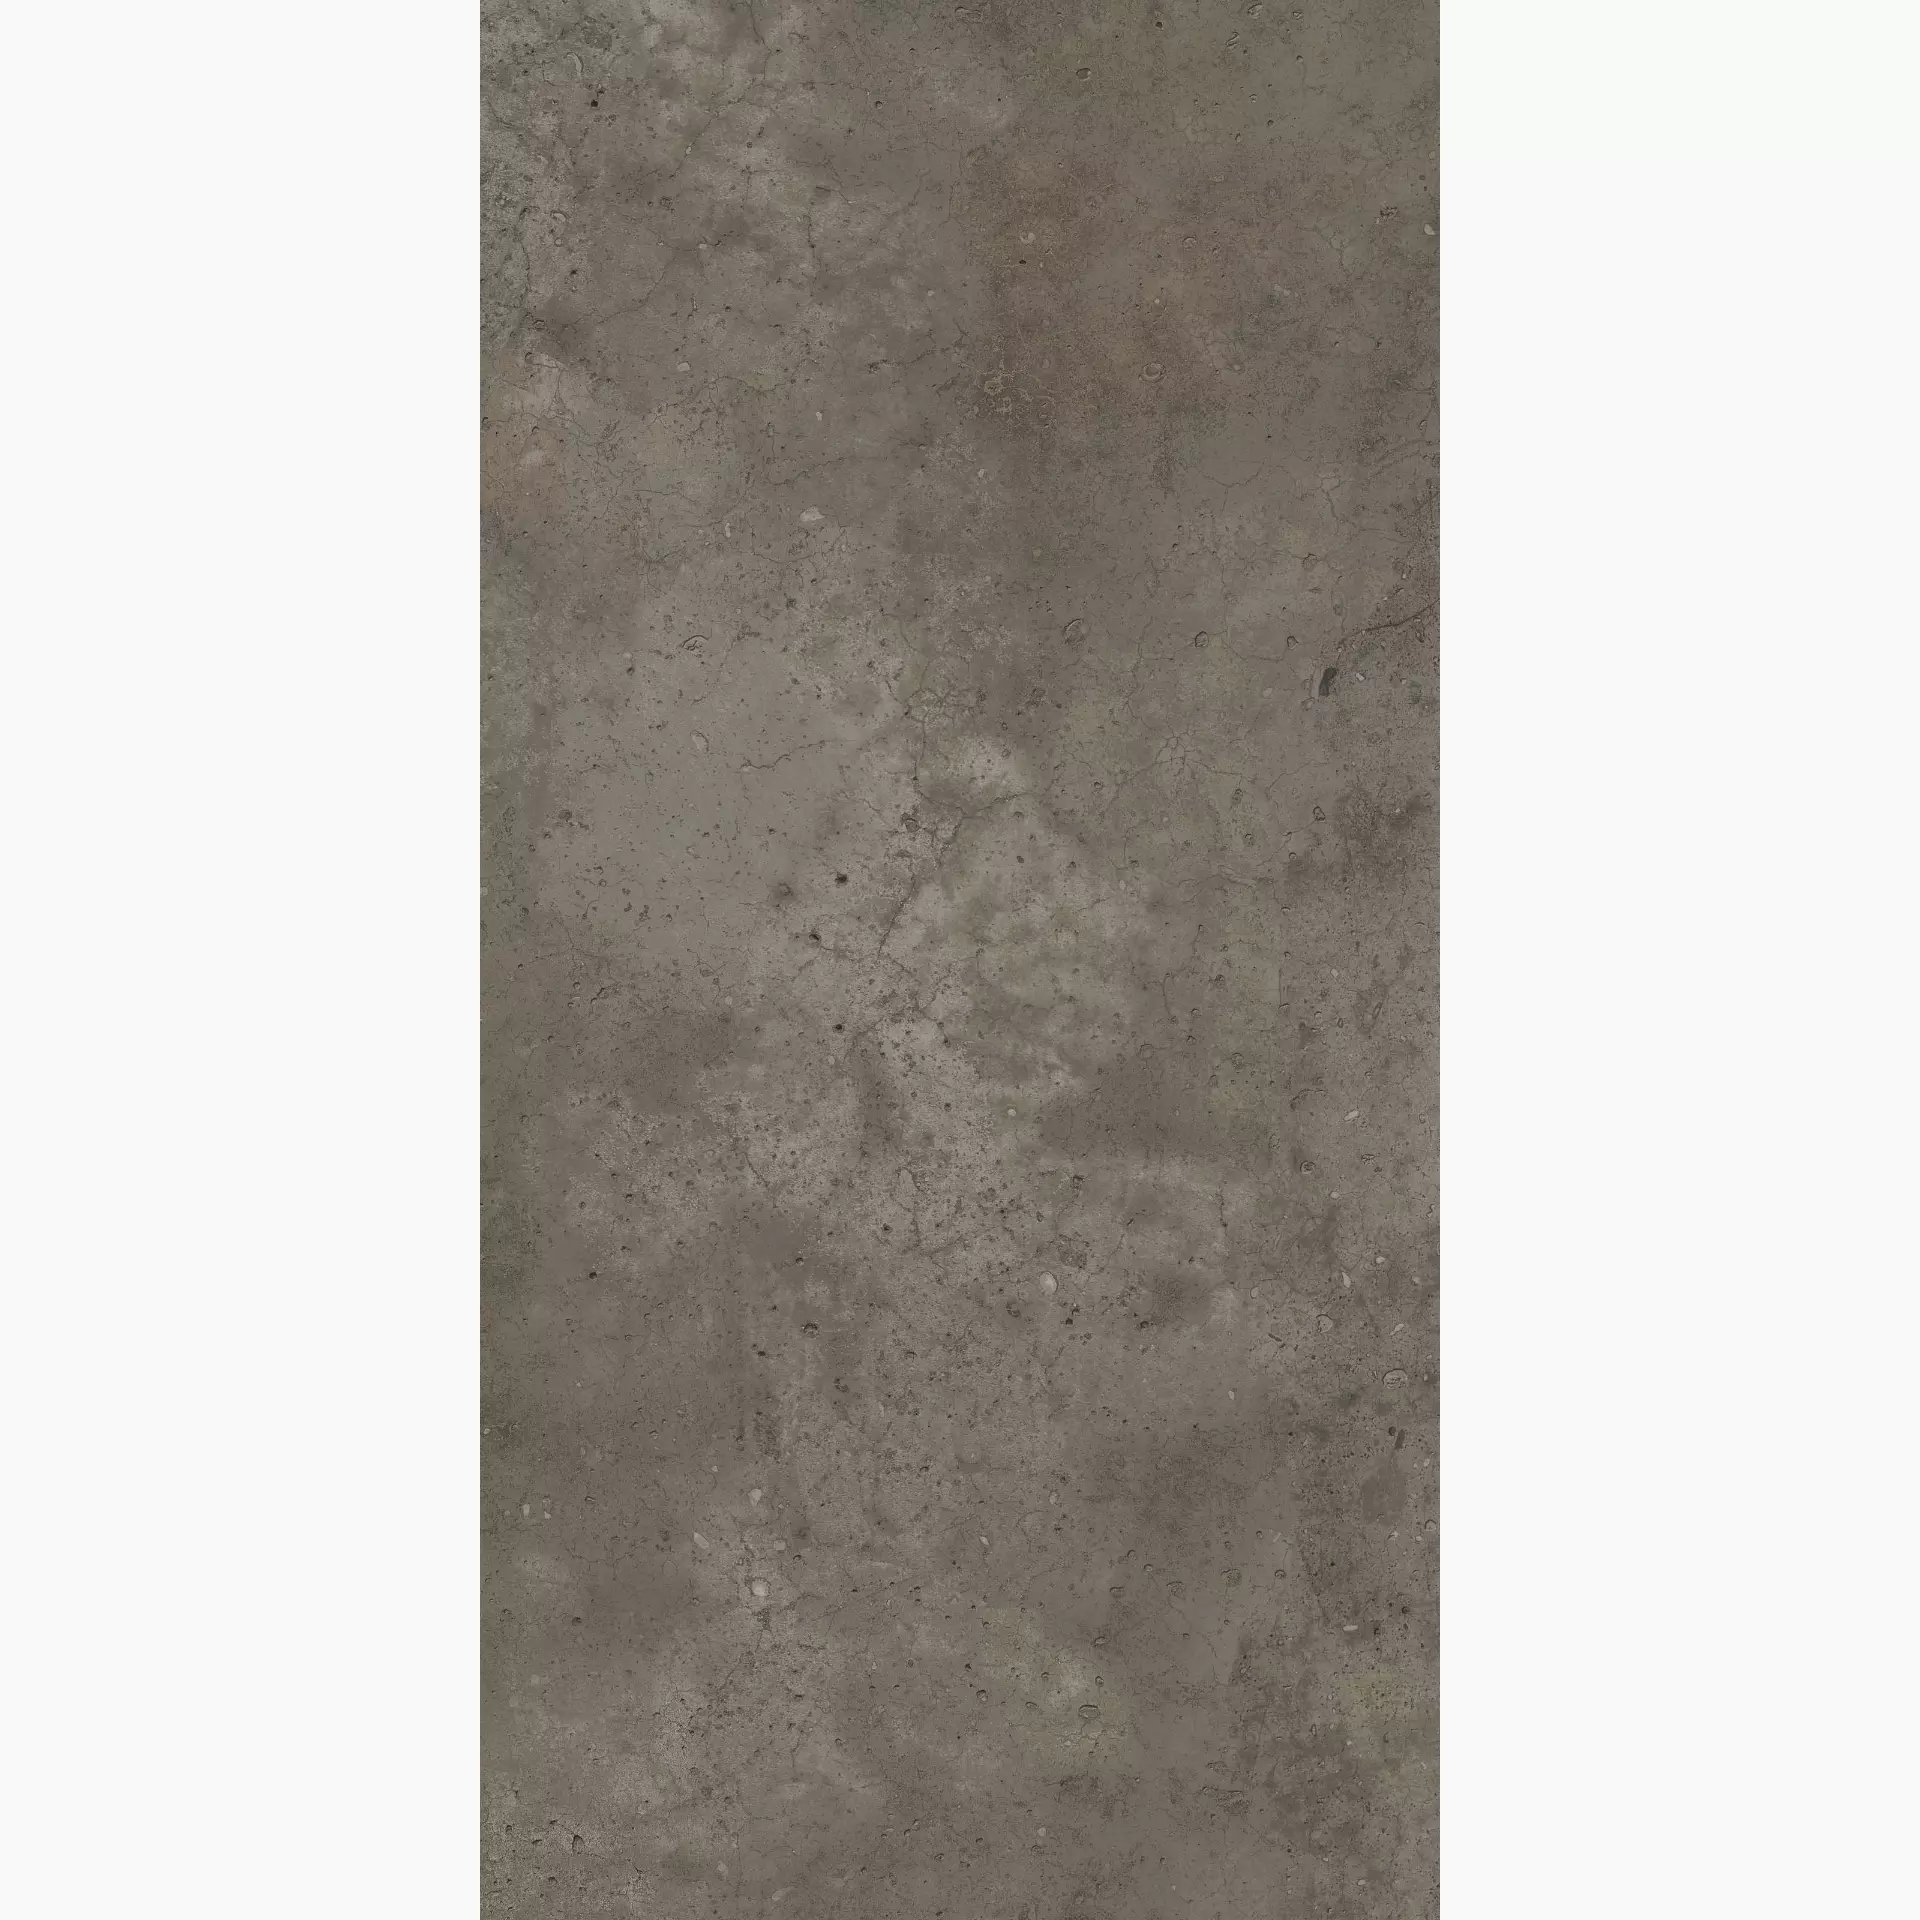 Flaviker Hyper Taupe Naturale PF60002453 60x120cm rectified 8,5mm